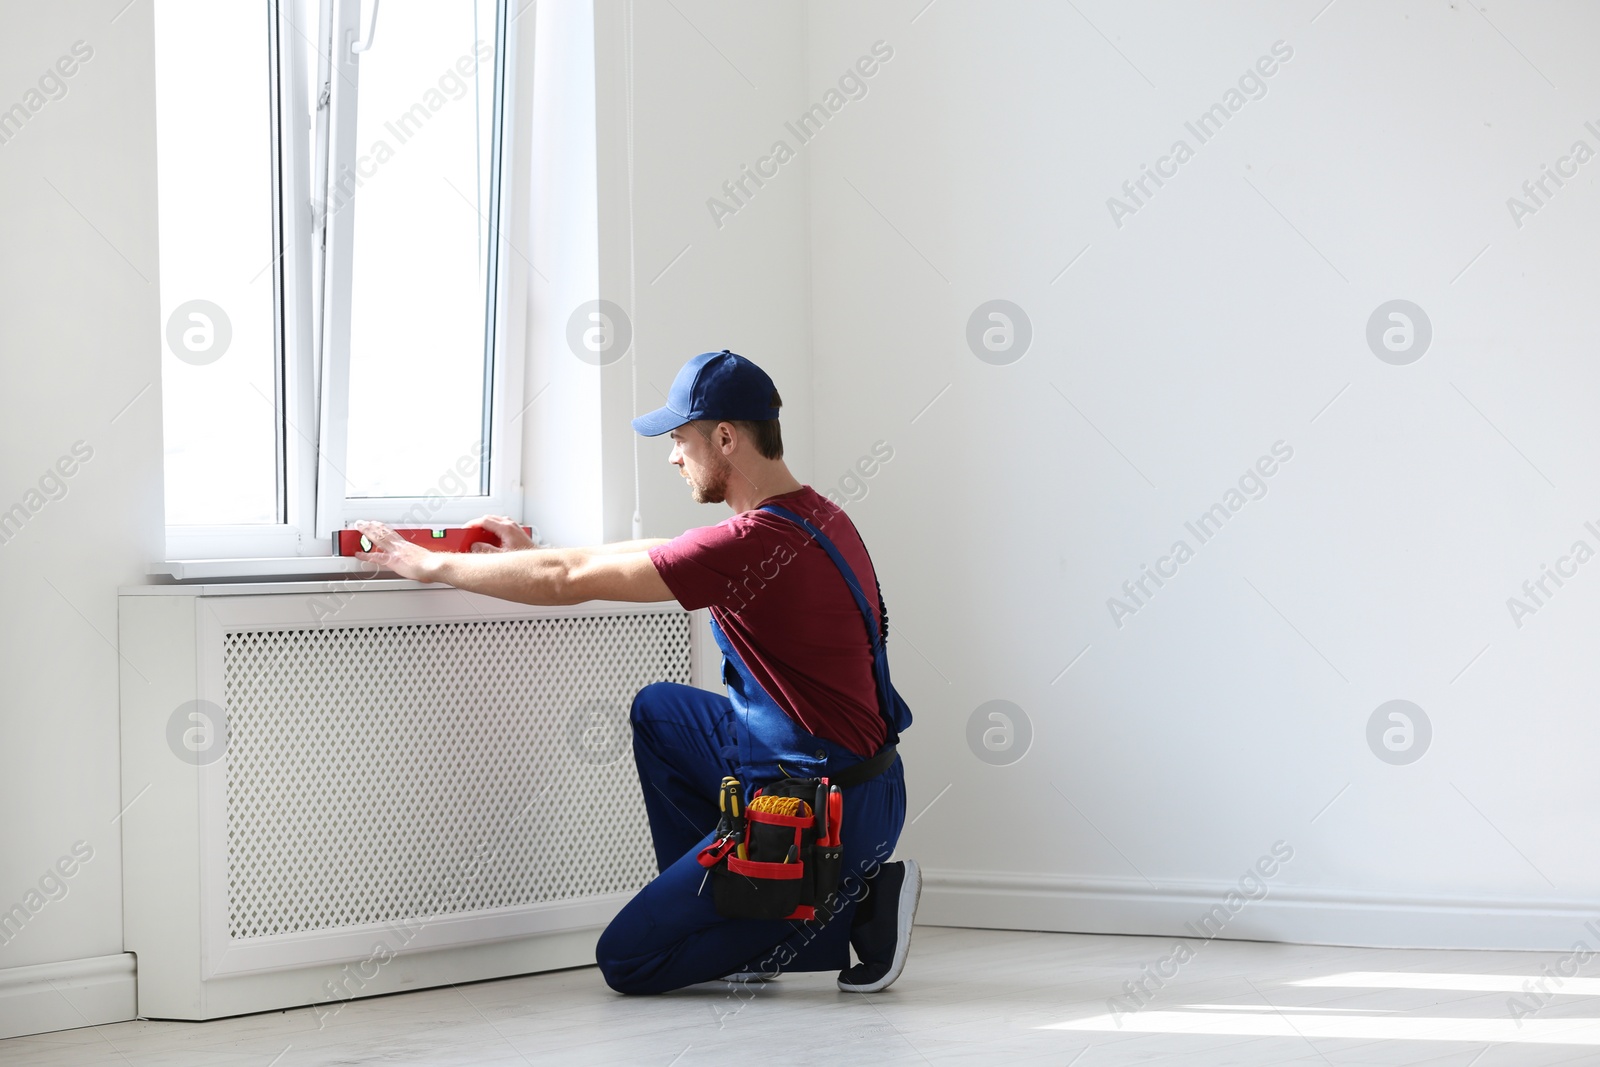 Photo of Handyman in uniform working with building level indoors. Professional construction tools